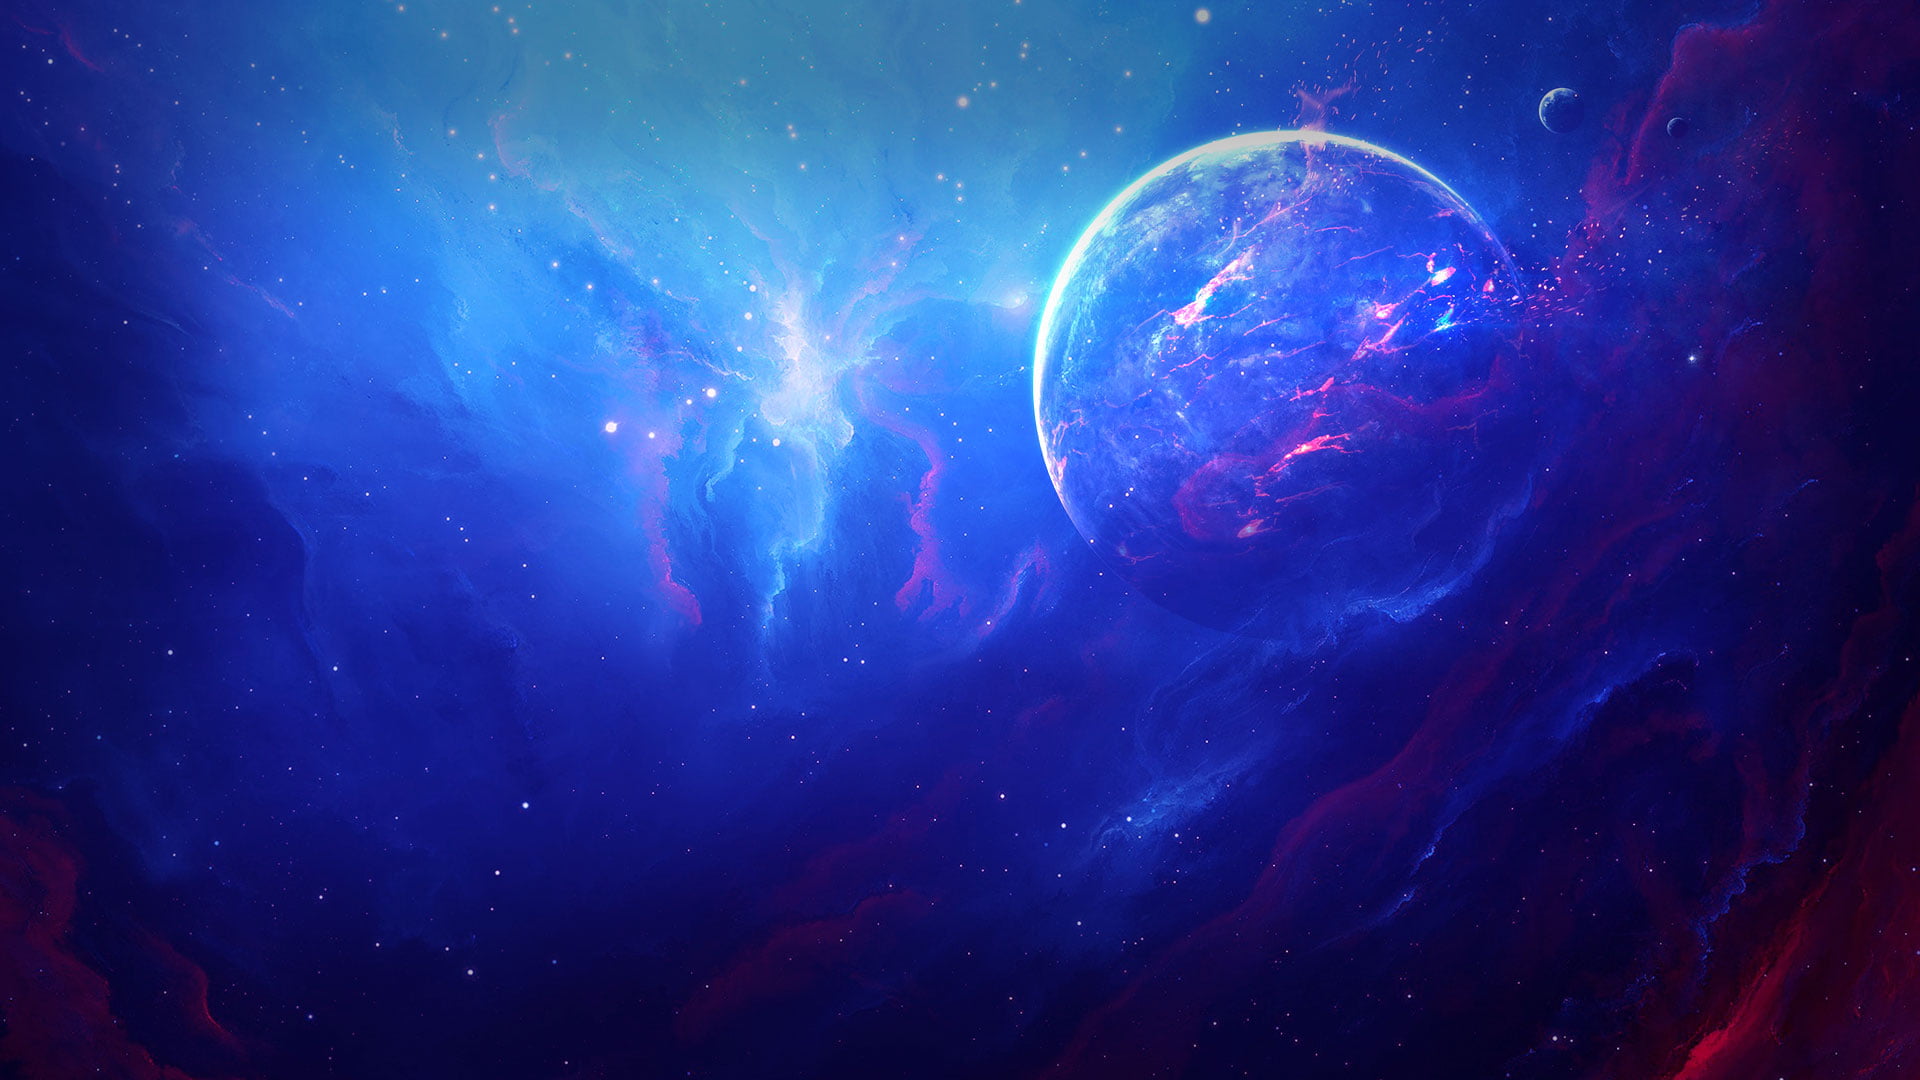 Outer space wallpaper, nebula, space, blue, red HD wallpaper